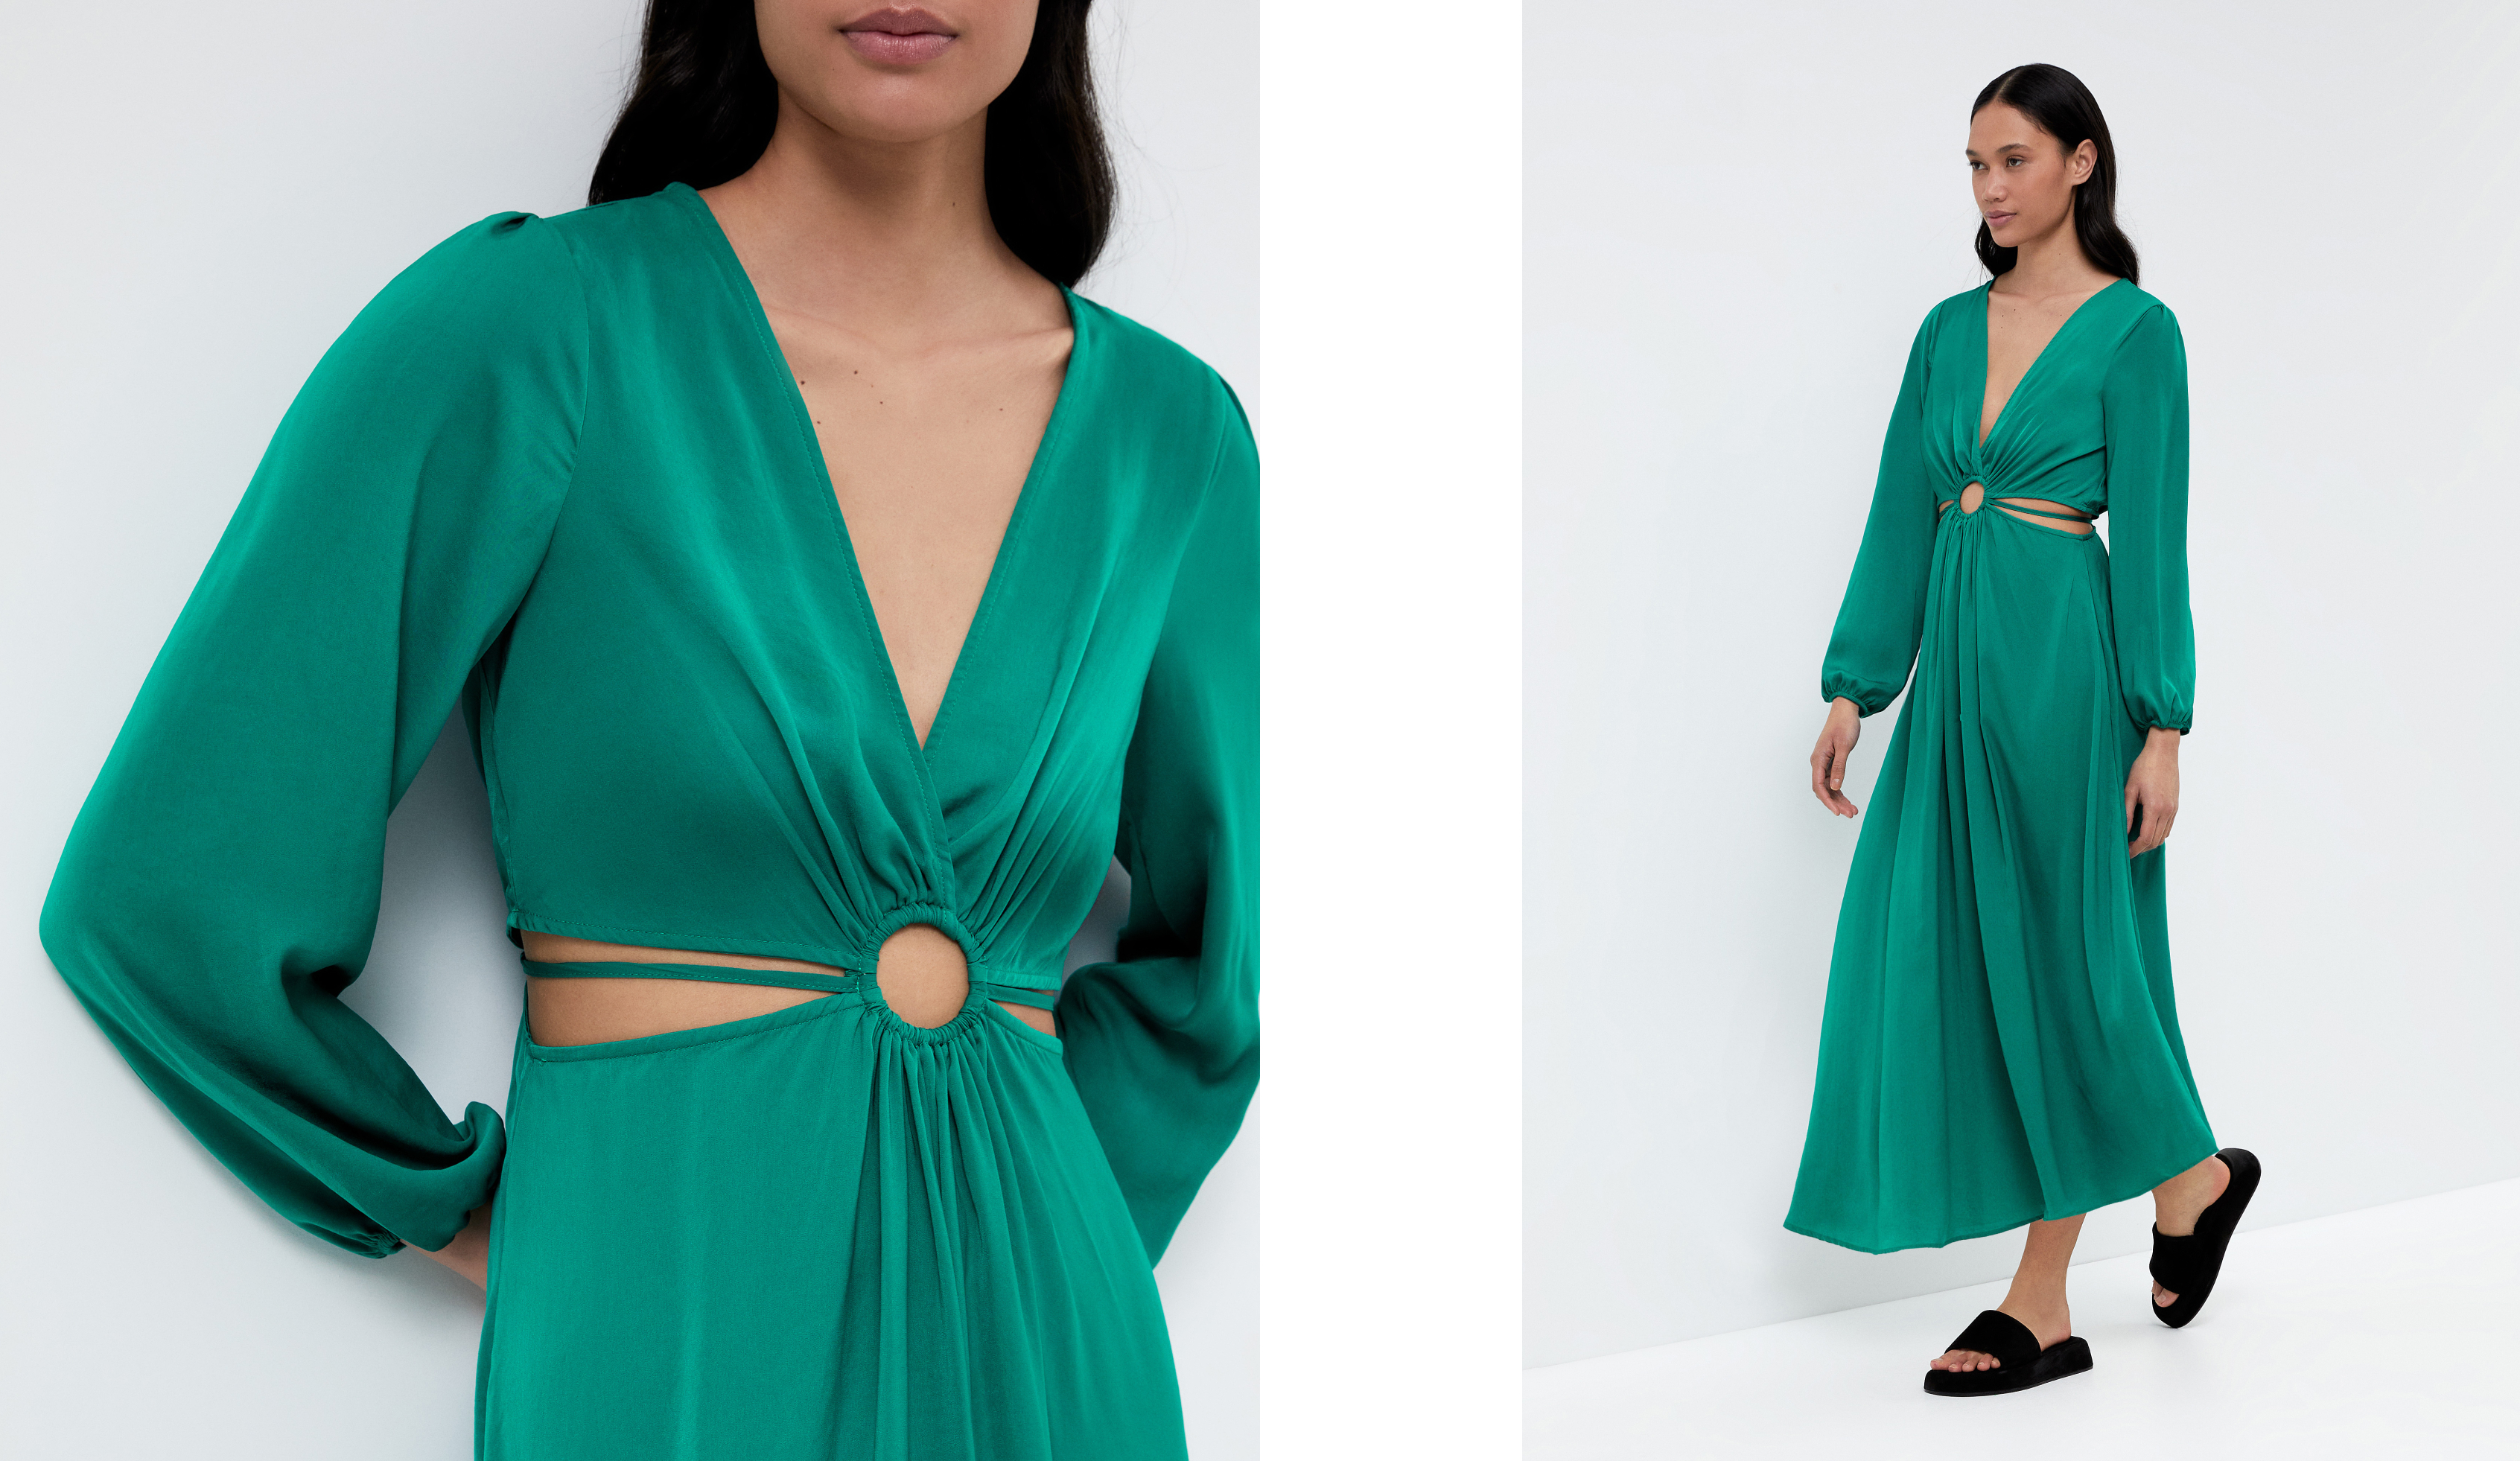 Satin cut out long-sleeved dress